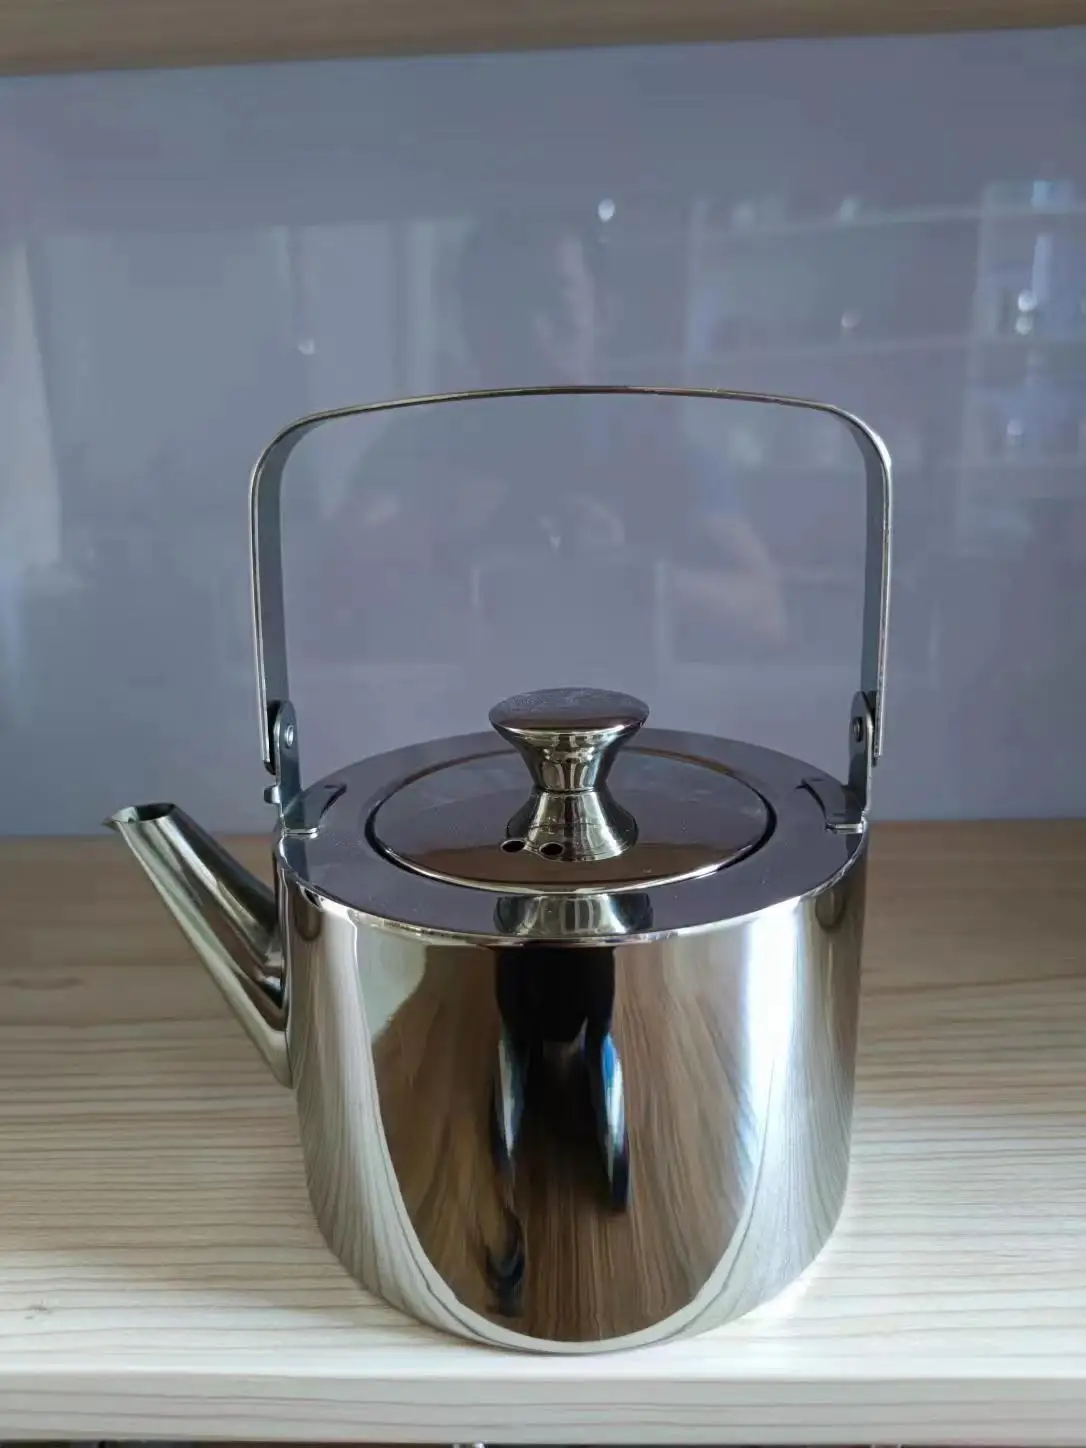 Hot Selling hot water kettle of New Style High Polished Stainless Steel cool water kettle